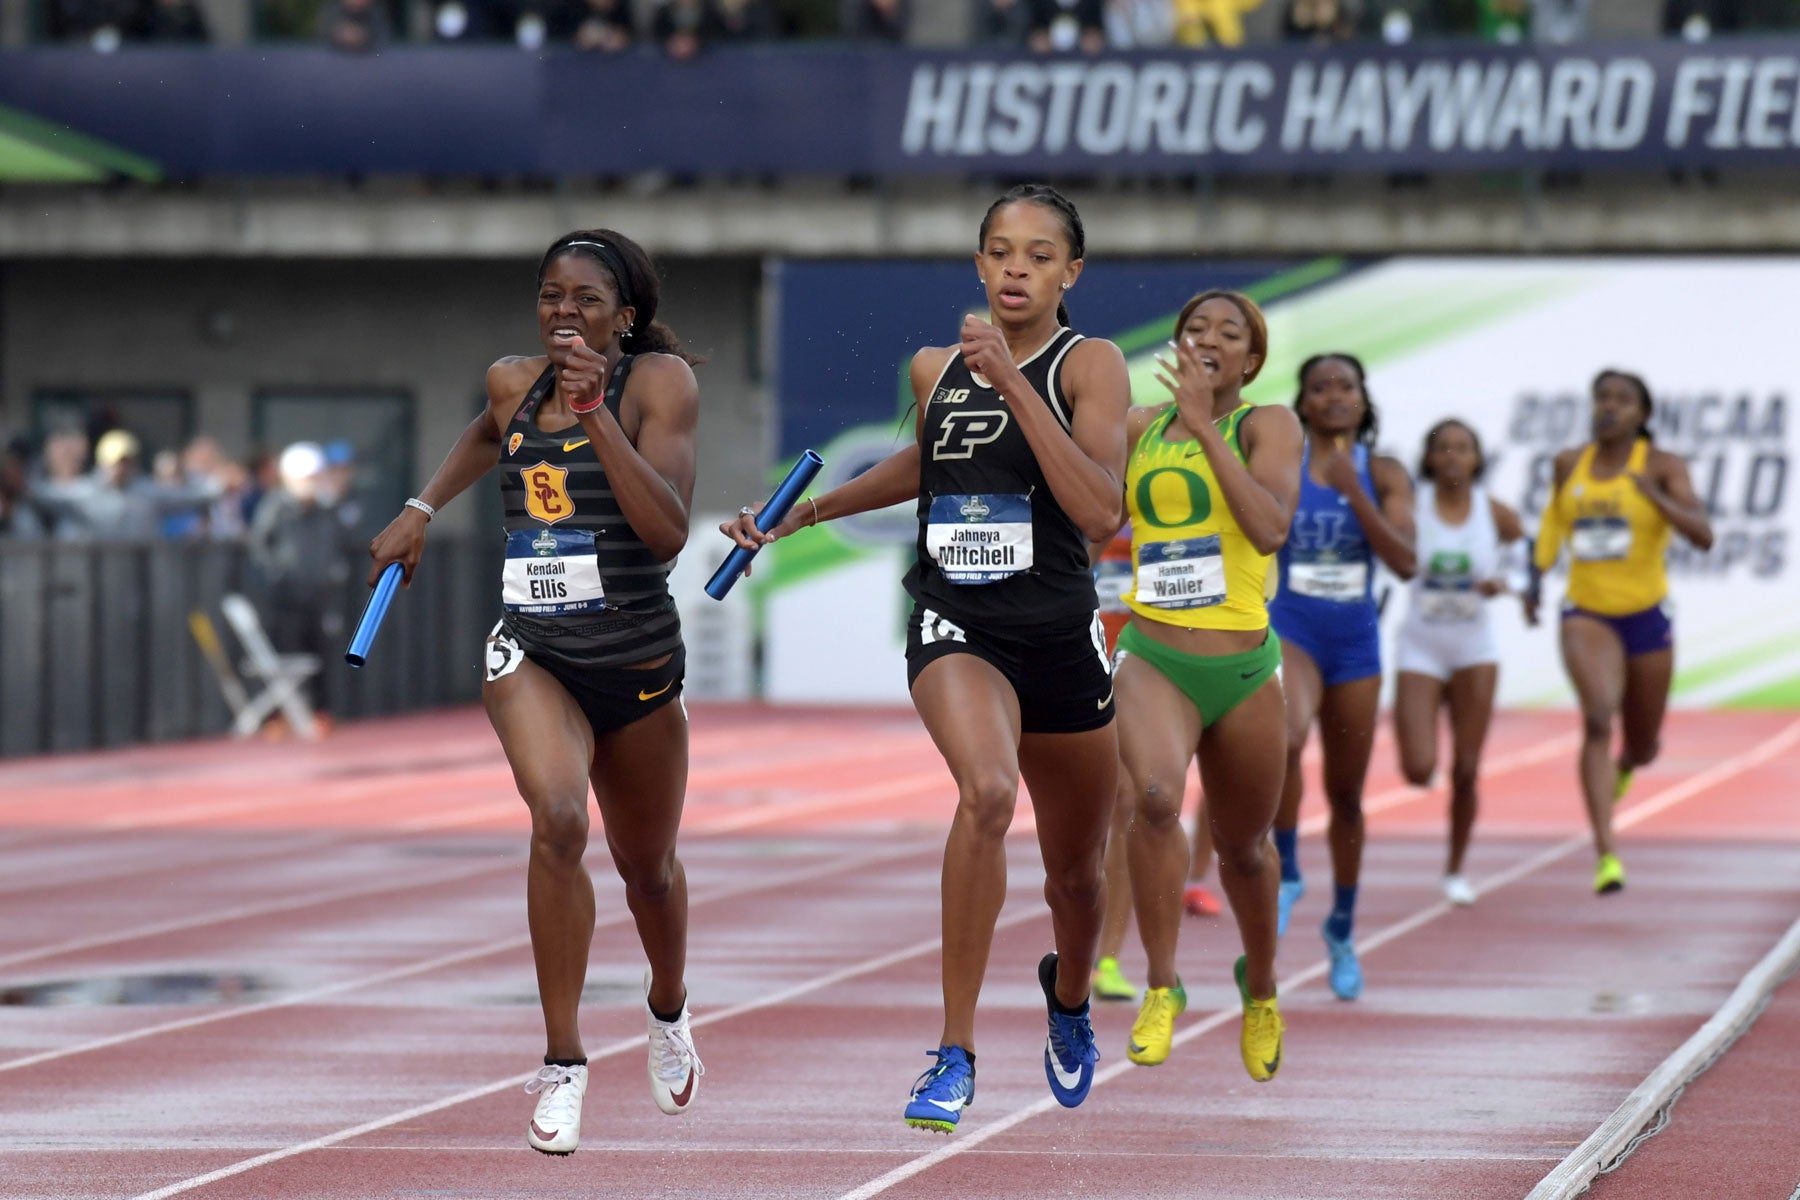 USC sports highlights 2018: women's track relay comeback win